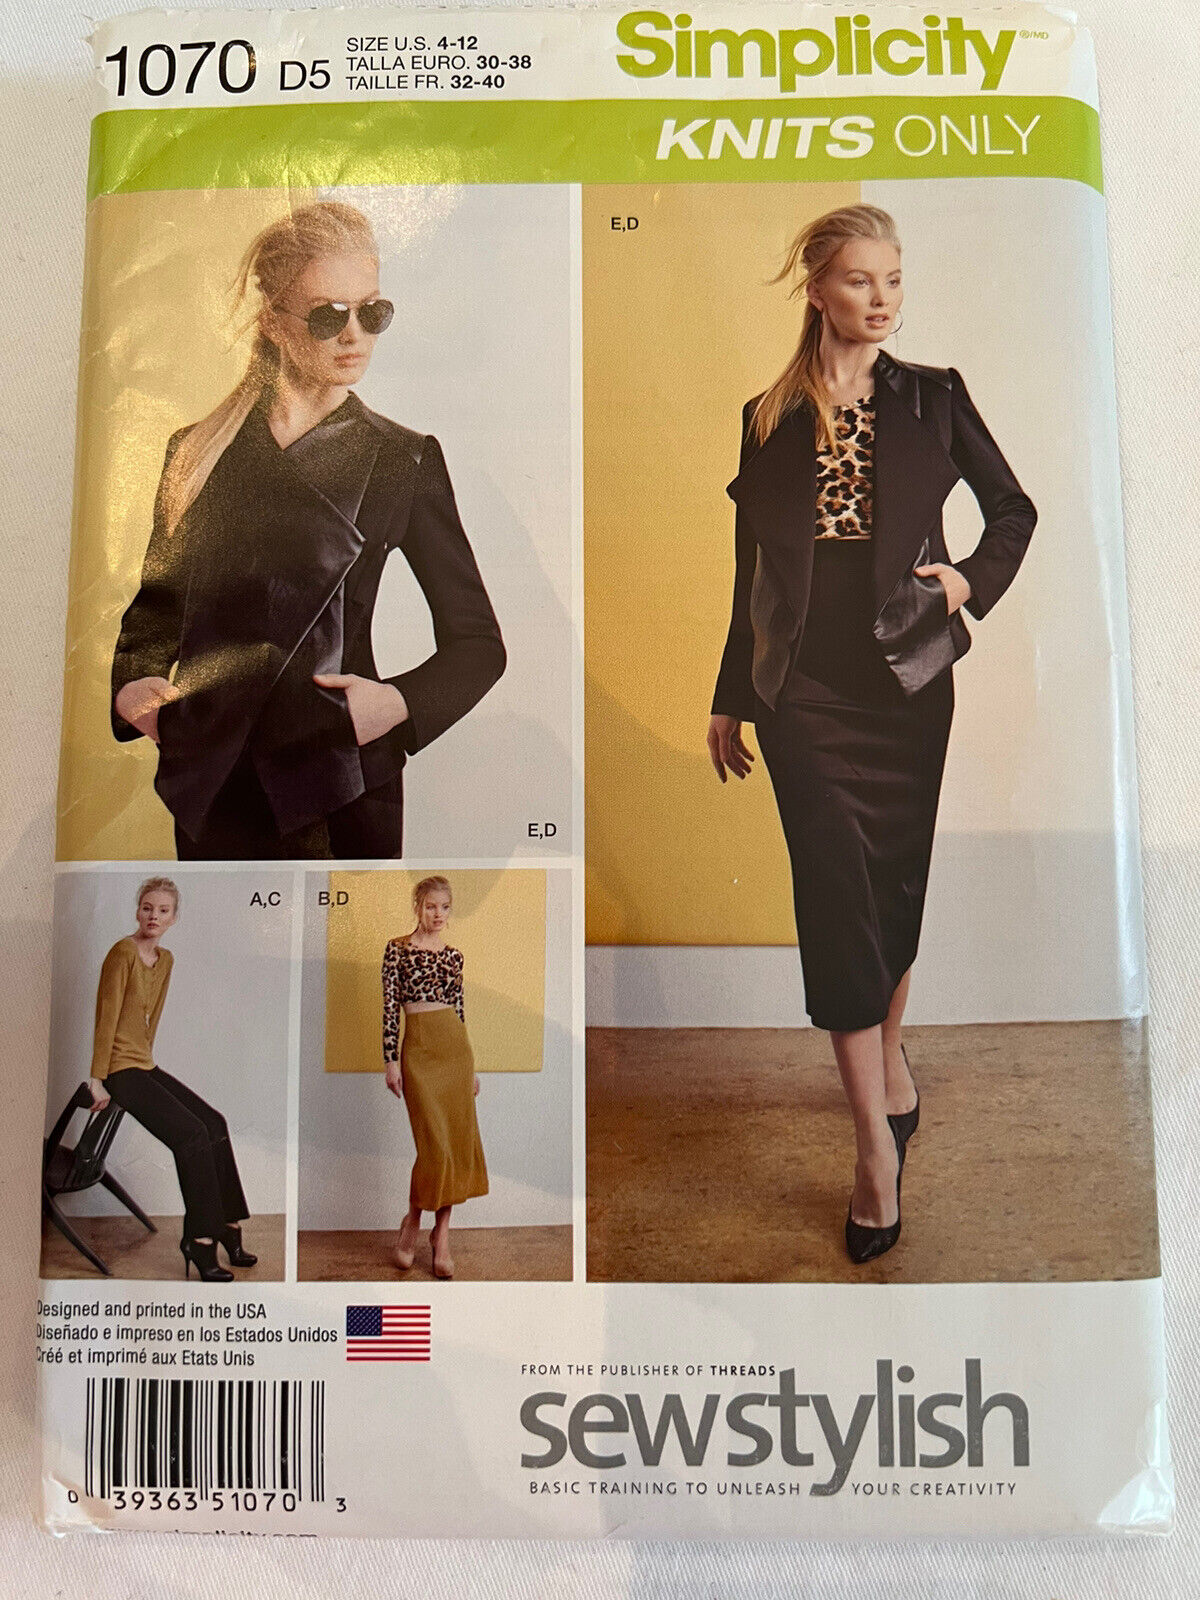 Simplicity 1070 D5 Knits Only Sew Stylish Sewing Pattern UNCUT 24 Piece Top Pant